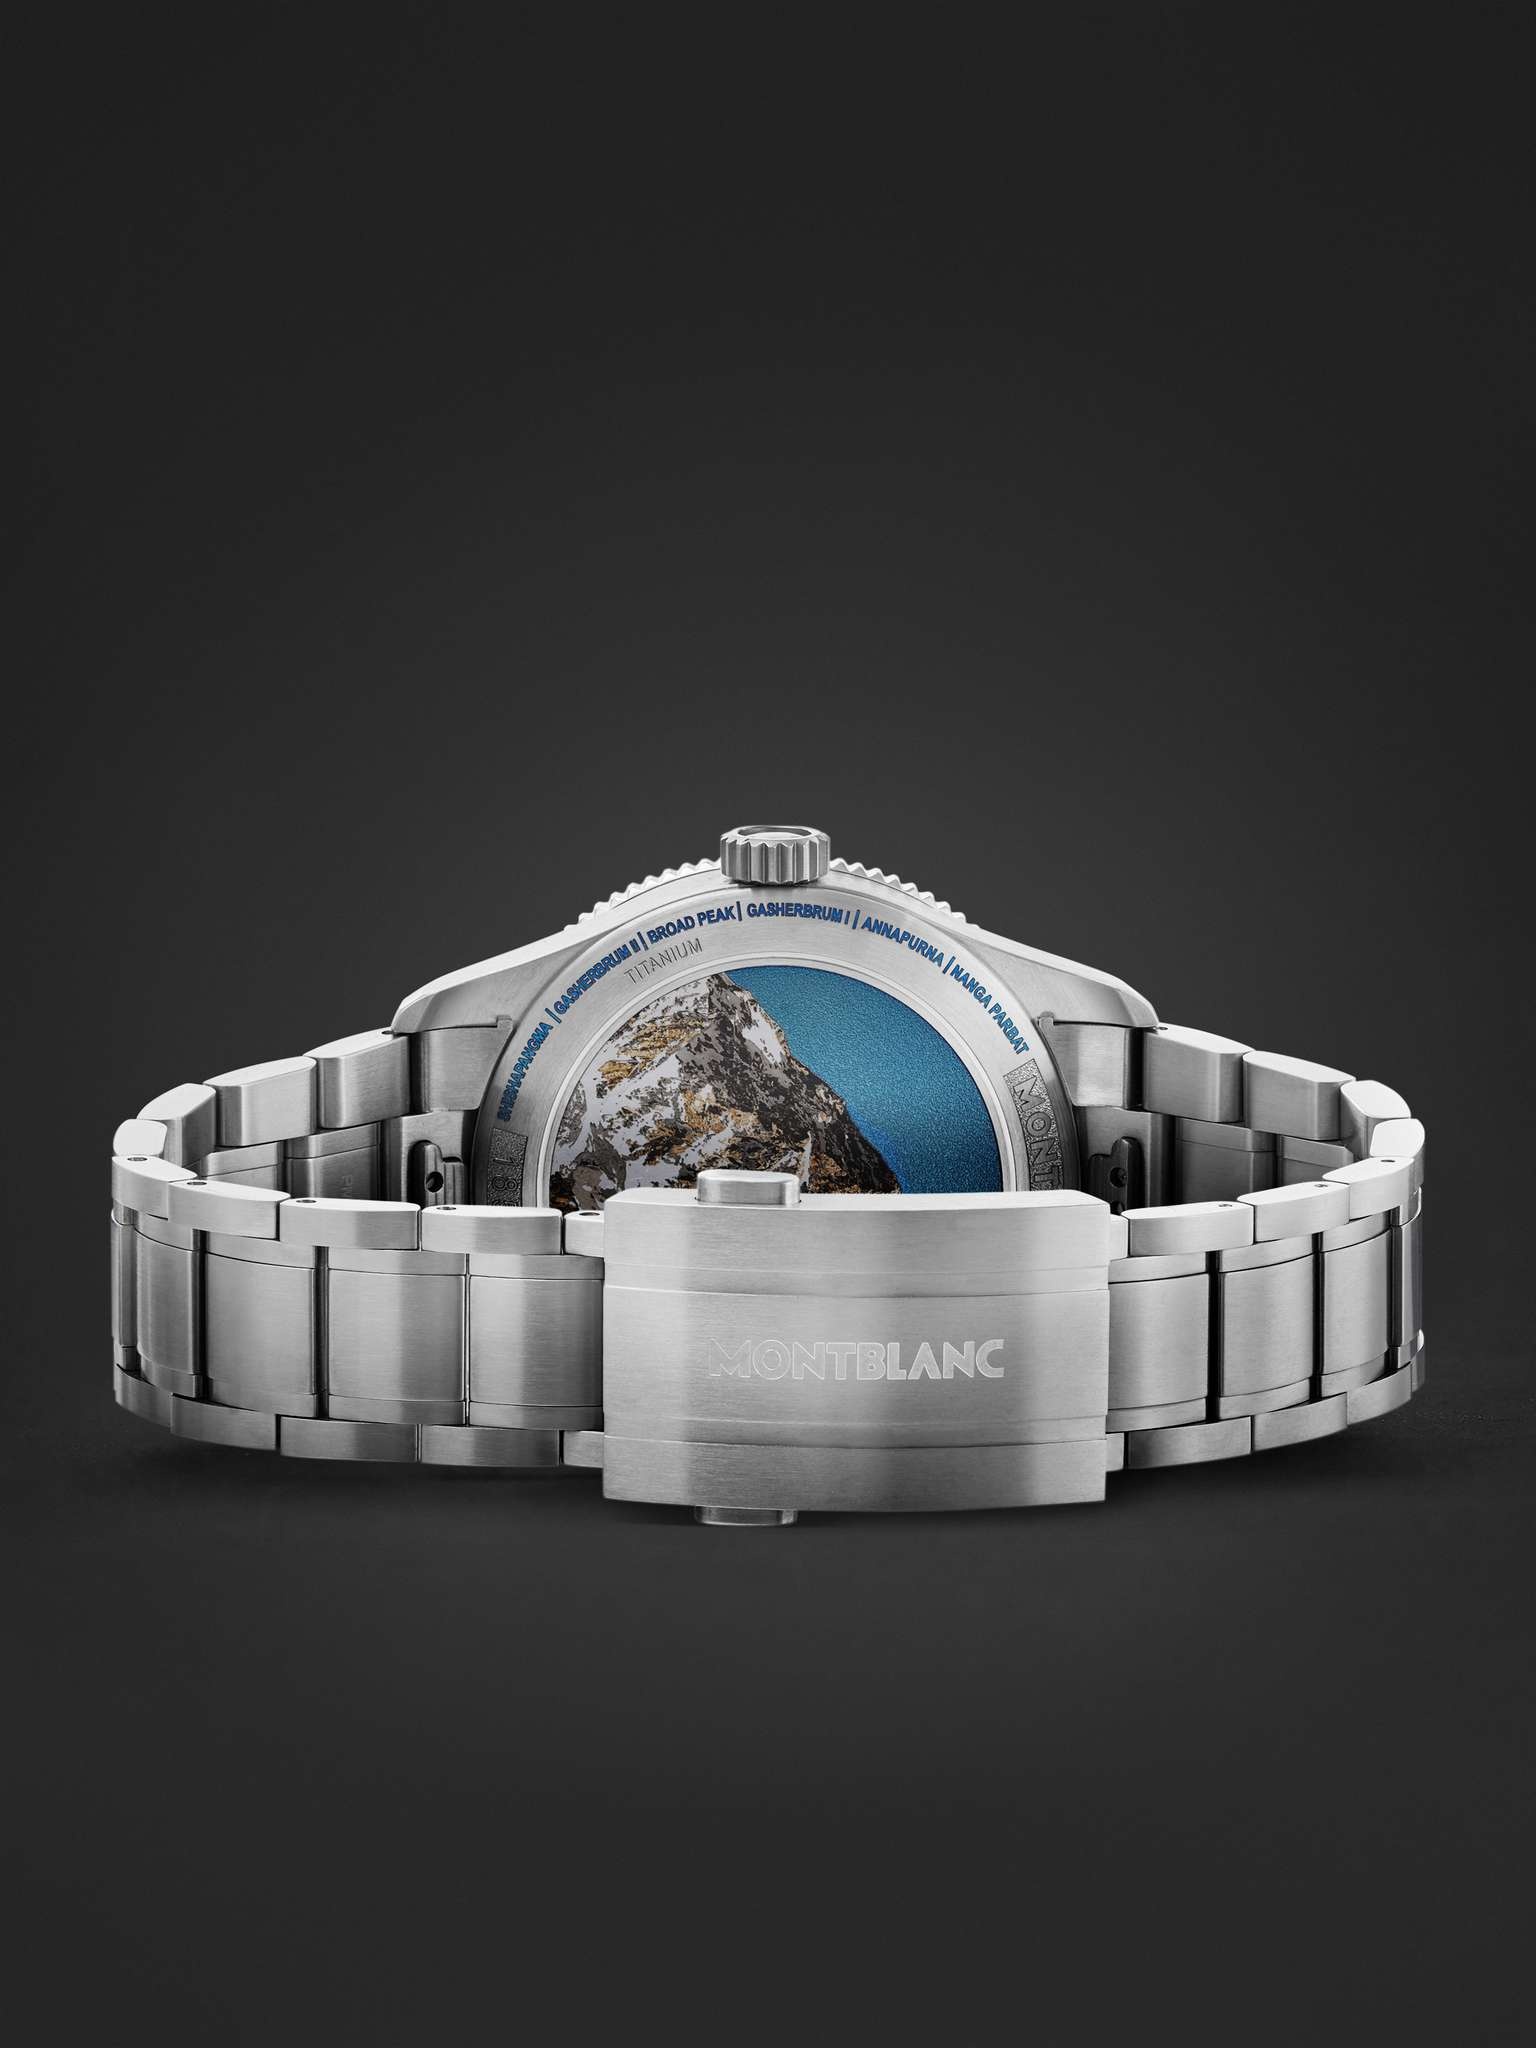 Montblanc 1858 Geosphere 0 Oxygen The 8000 Automatic 42mm Titanium, Ceramic and Stainless Steel Watc - 6